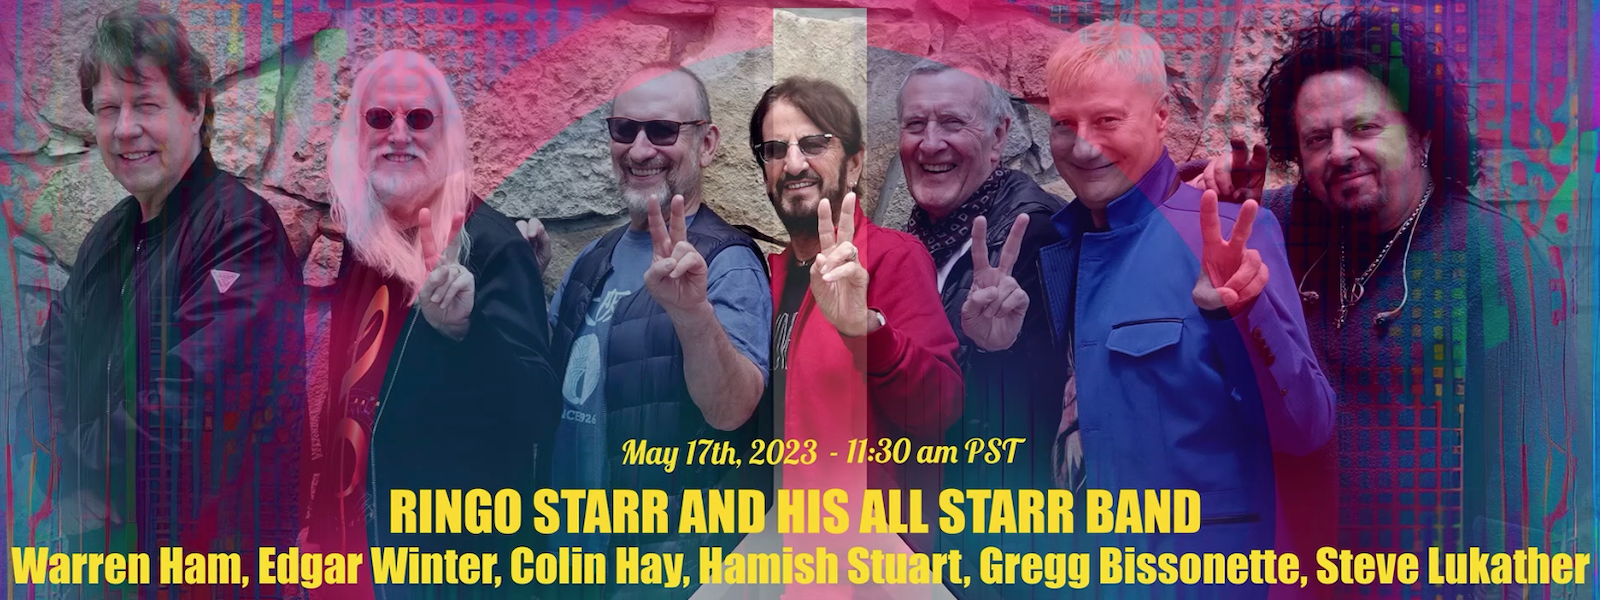 Ringo Starr & His All Starr Band Hit The Road For Spring & Fall Dates [INTERVIEW]